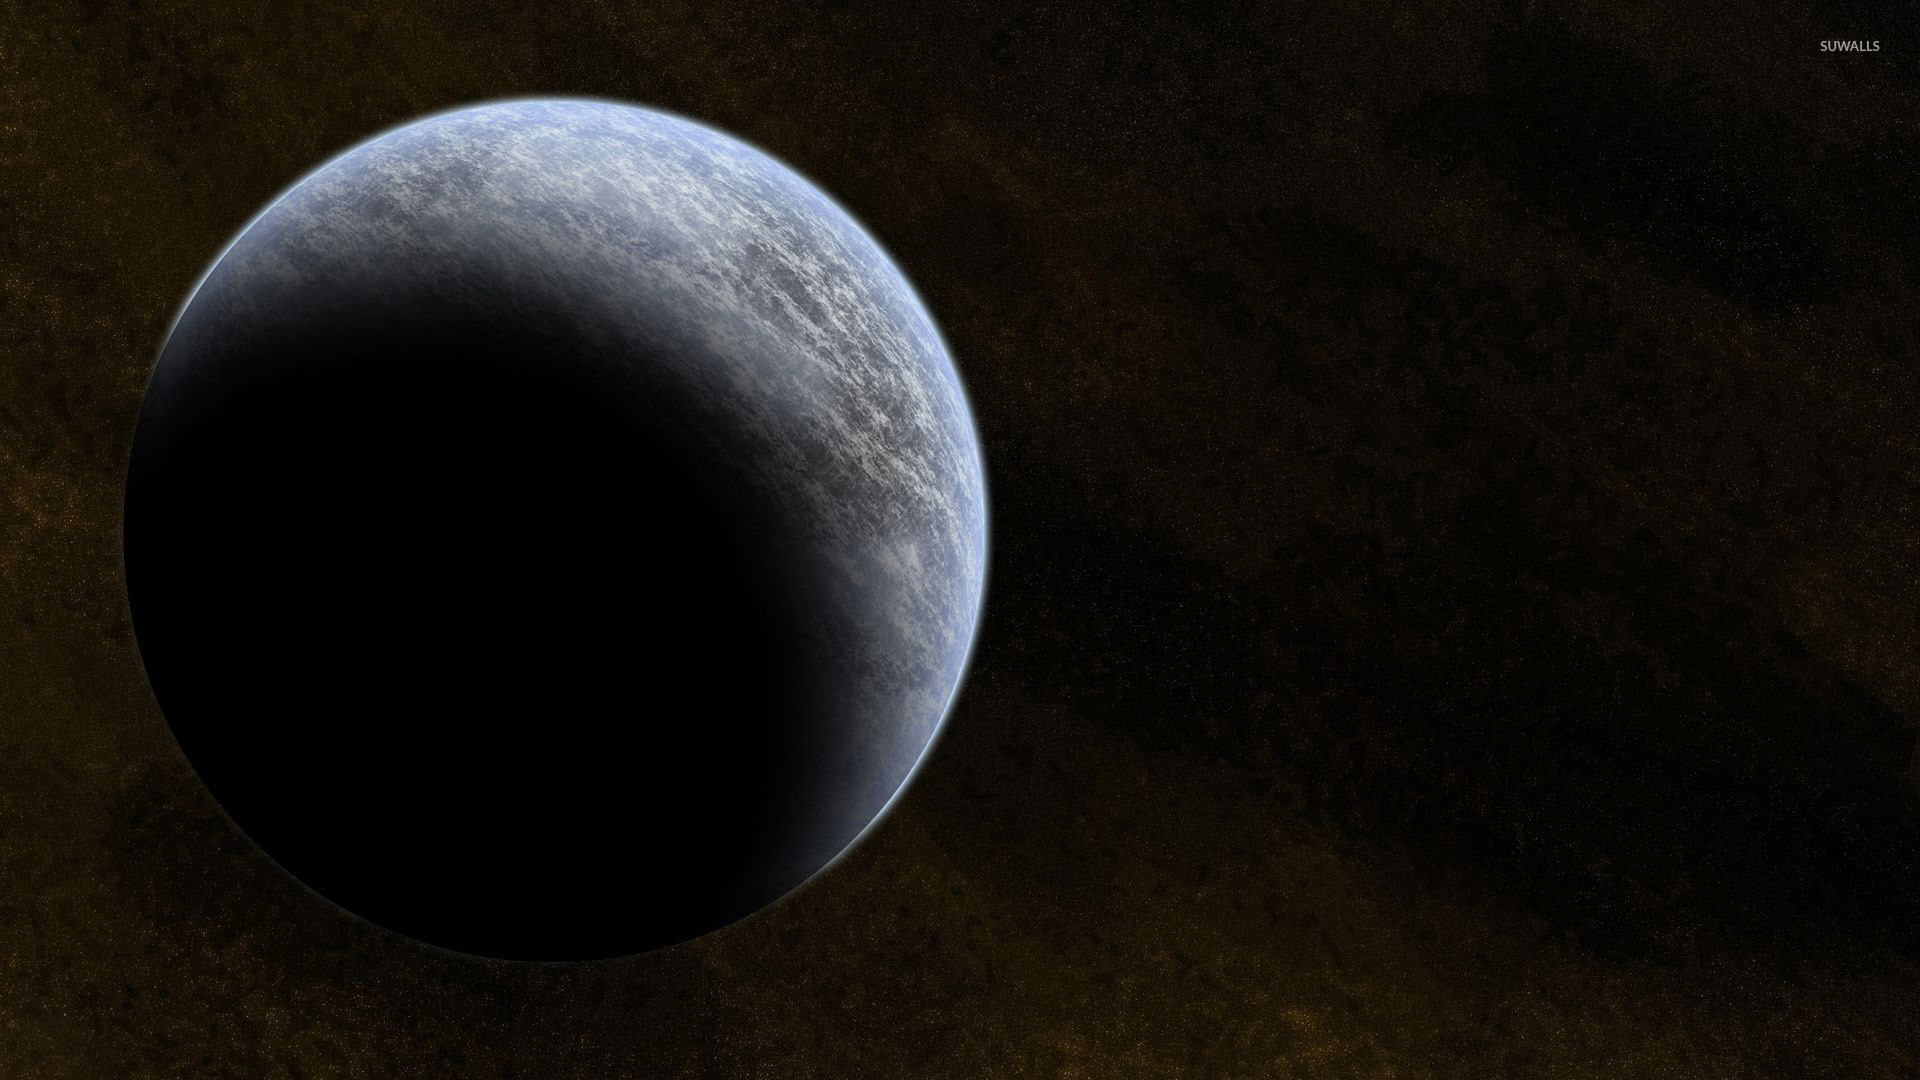 Gray planet in the brown universe wallpaper jpg